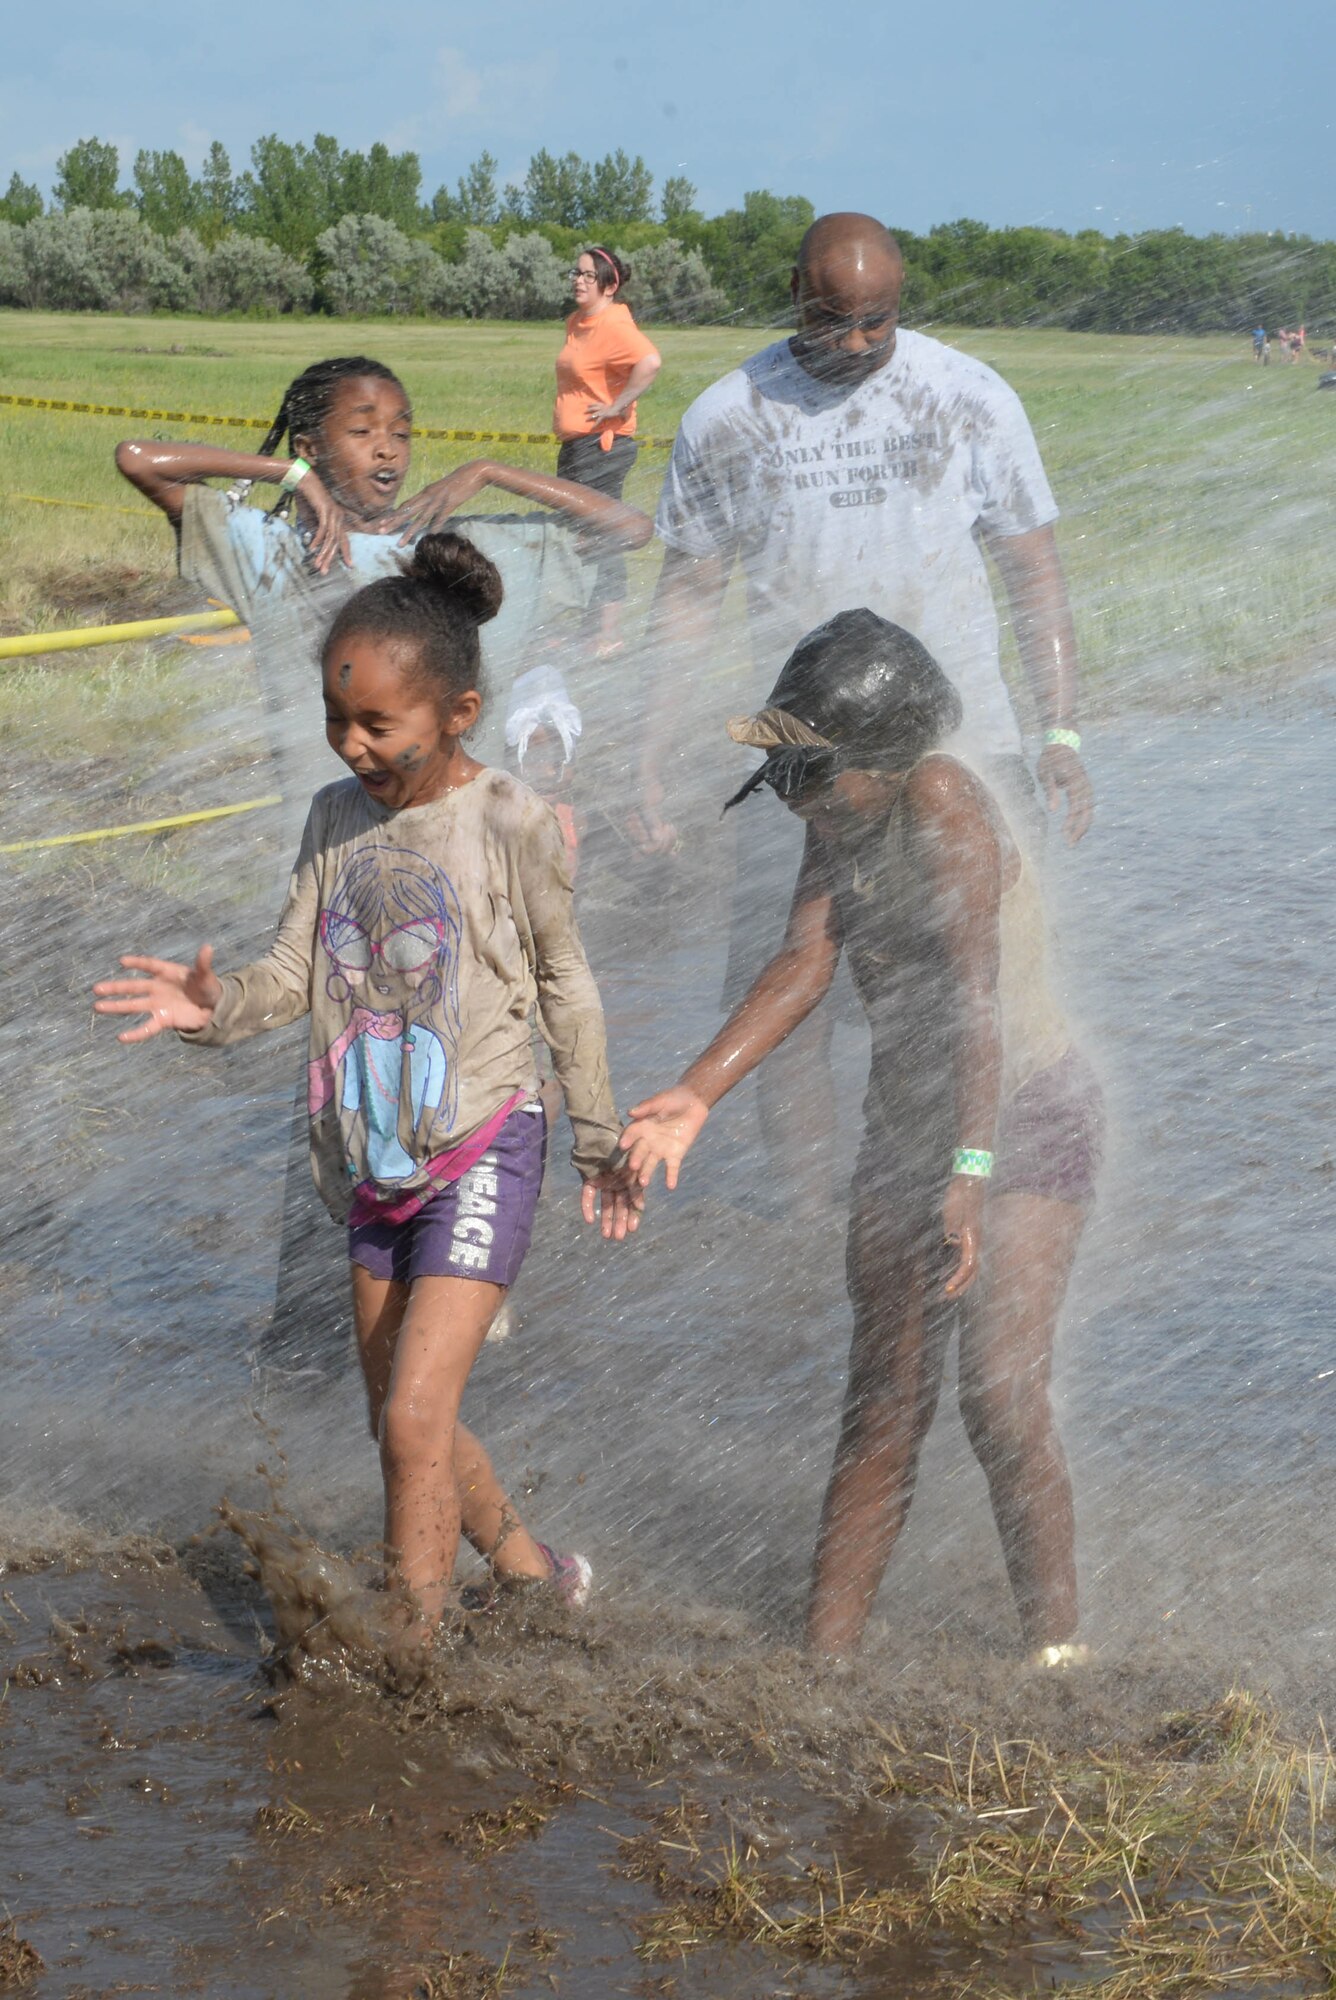 The 5th Force Support Squadron hosted the 2016 Mini Mudder at Minot Air Force Base, N.D., July 15, 2016. The race consisted of different obstacles that challenged Airmen and their families to crawl, climb, run and slide through mud and water. Approximately 900 Airmen and their families attend the event, which lasted 2 hours. (U.S. Air Force photo/Airman 1st Class Jessica Weissman) 